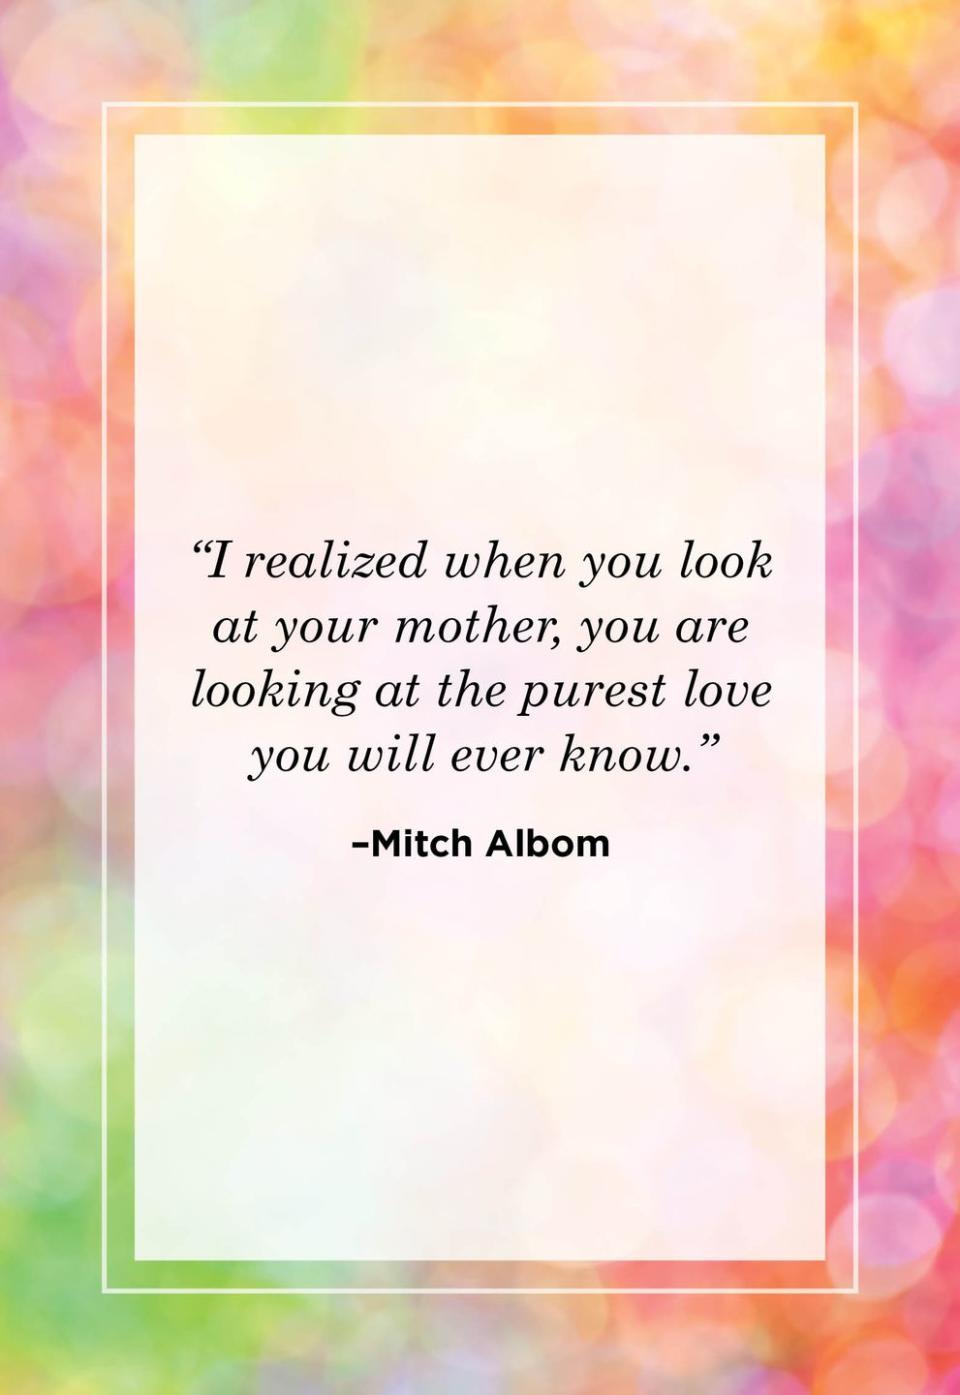 <p>"I realized when you look at your mother you are looking at the purest love will ever know."<br></p>